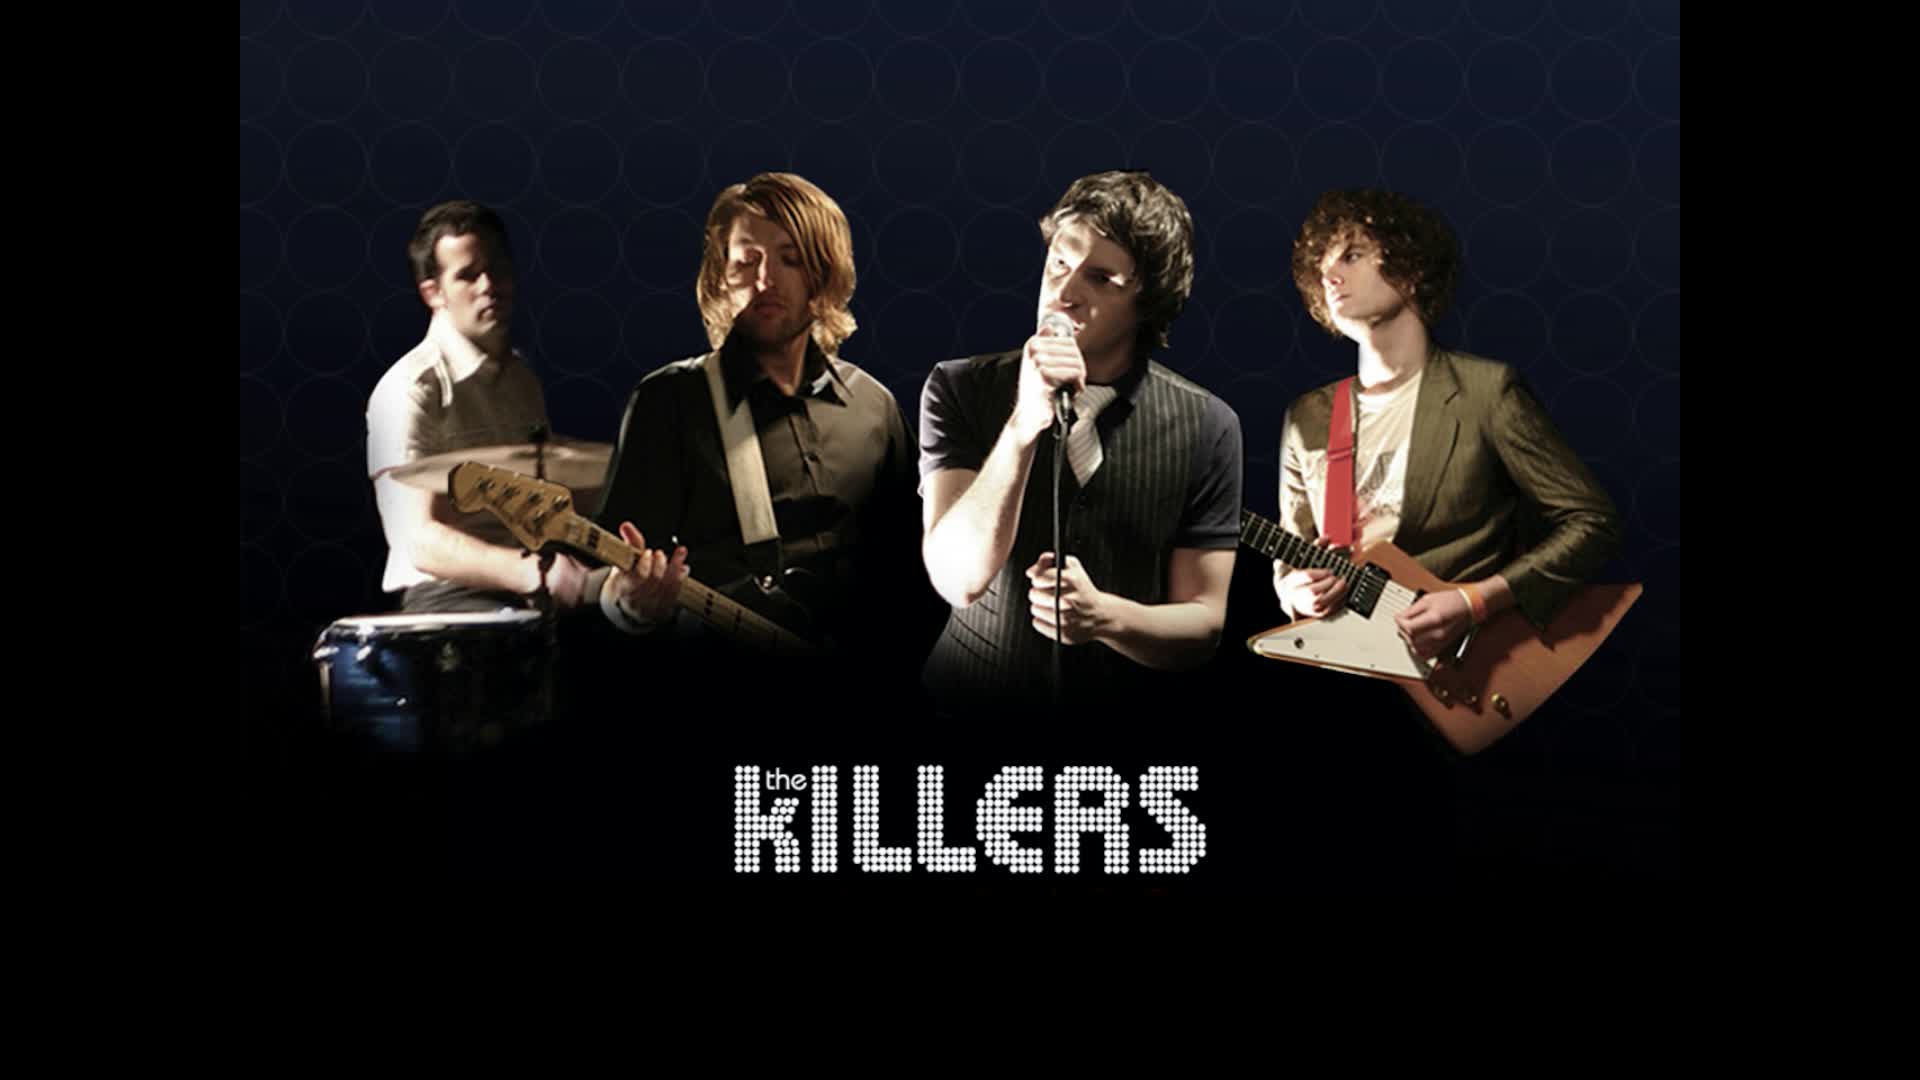 The killers the somebody me. Зе Киллерс группа. Killer. The Killers 2001. The Killers Постер.